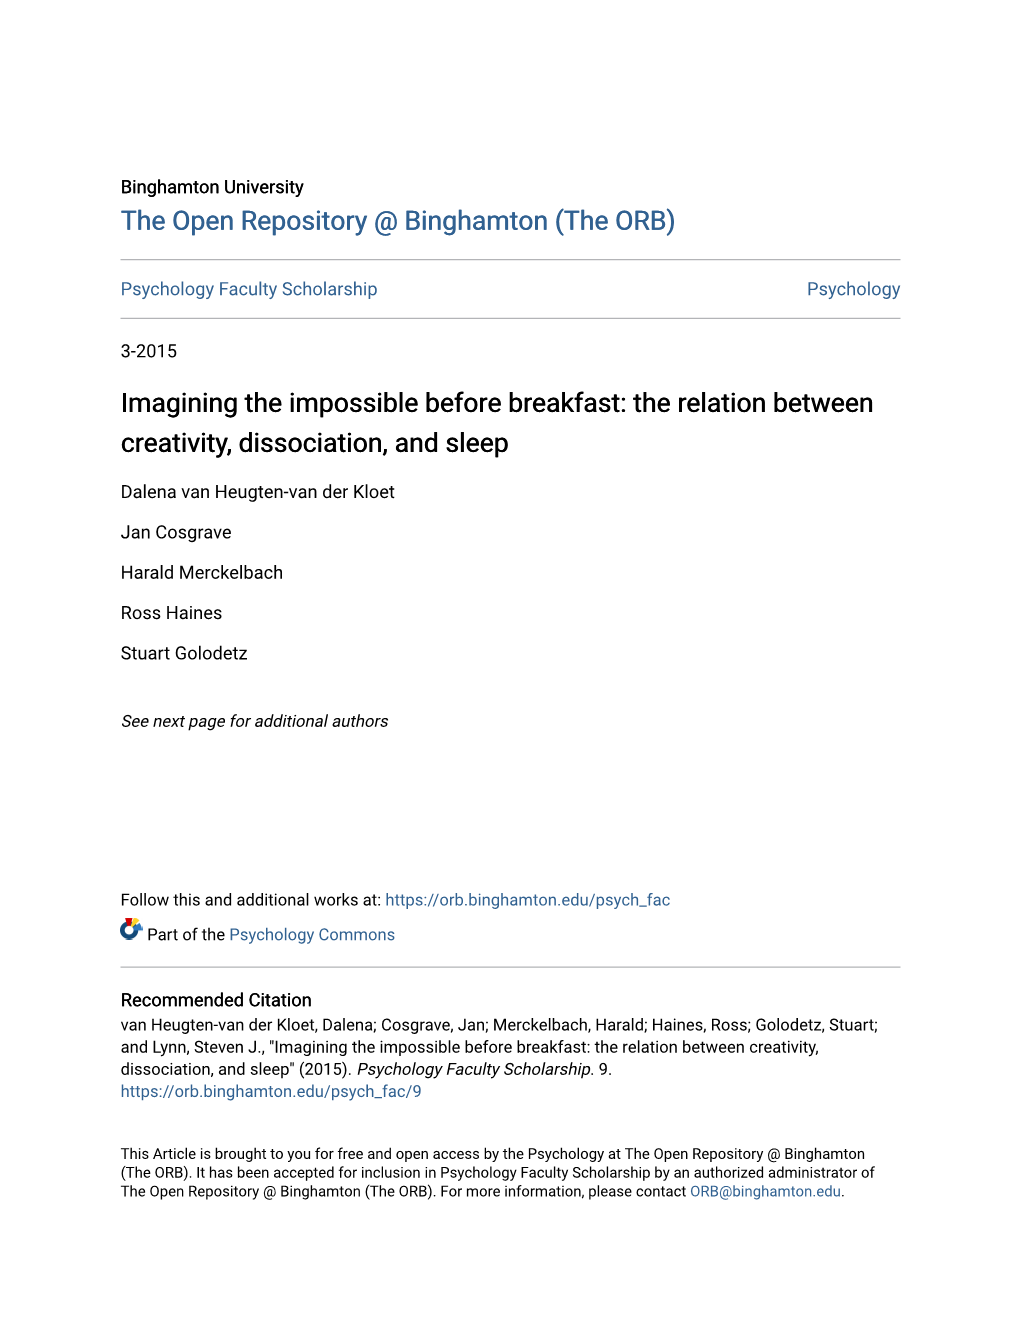 Imagining the Impossible Before Breakfast: the Relation Between Creativity, Dissociation, and Sleep